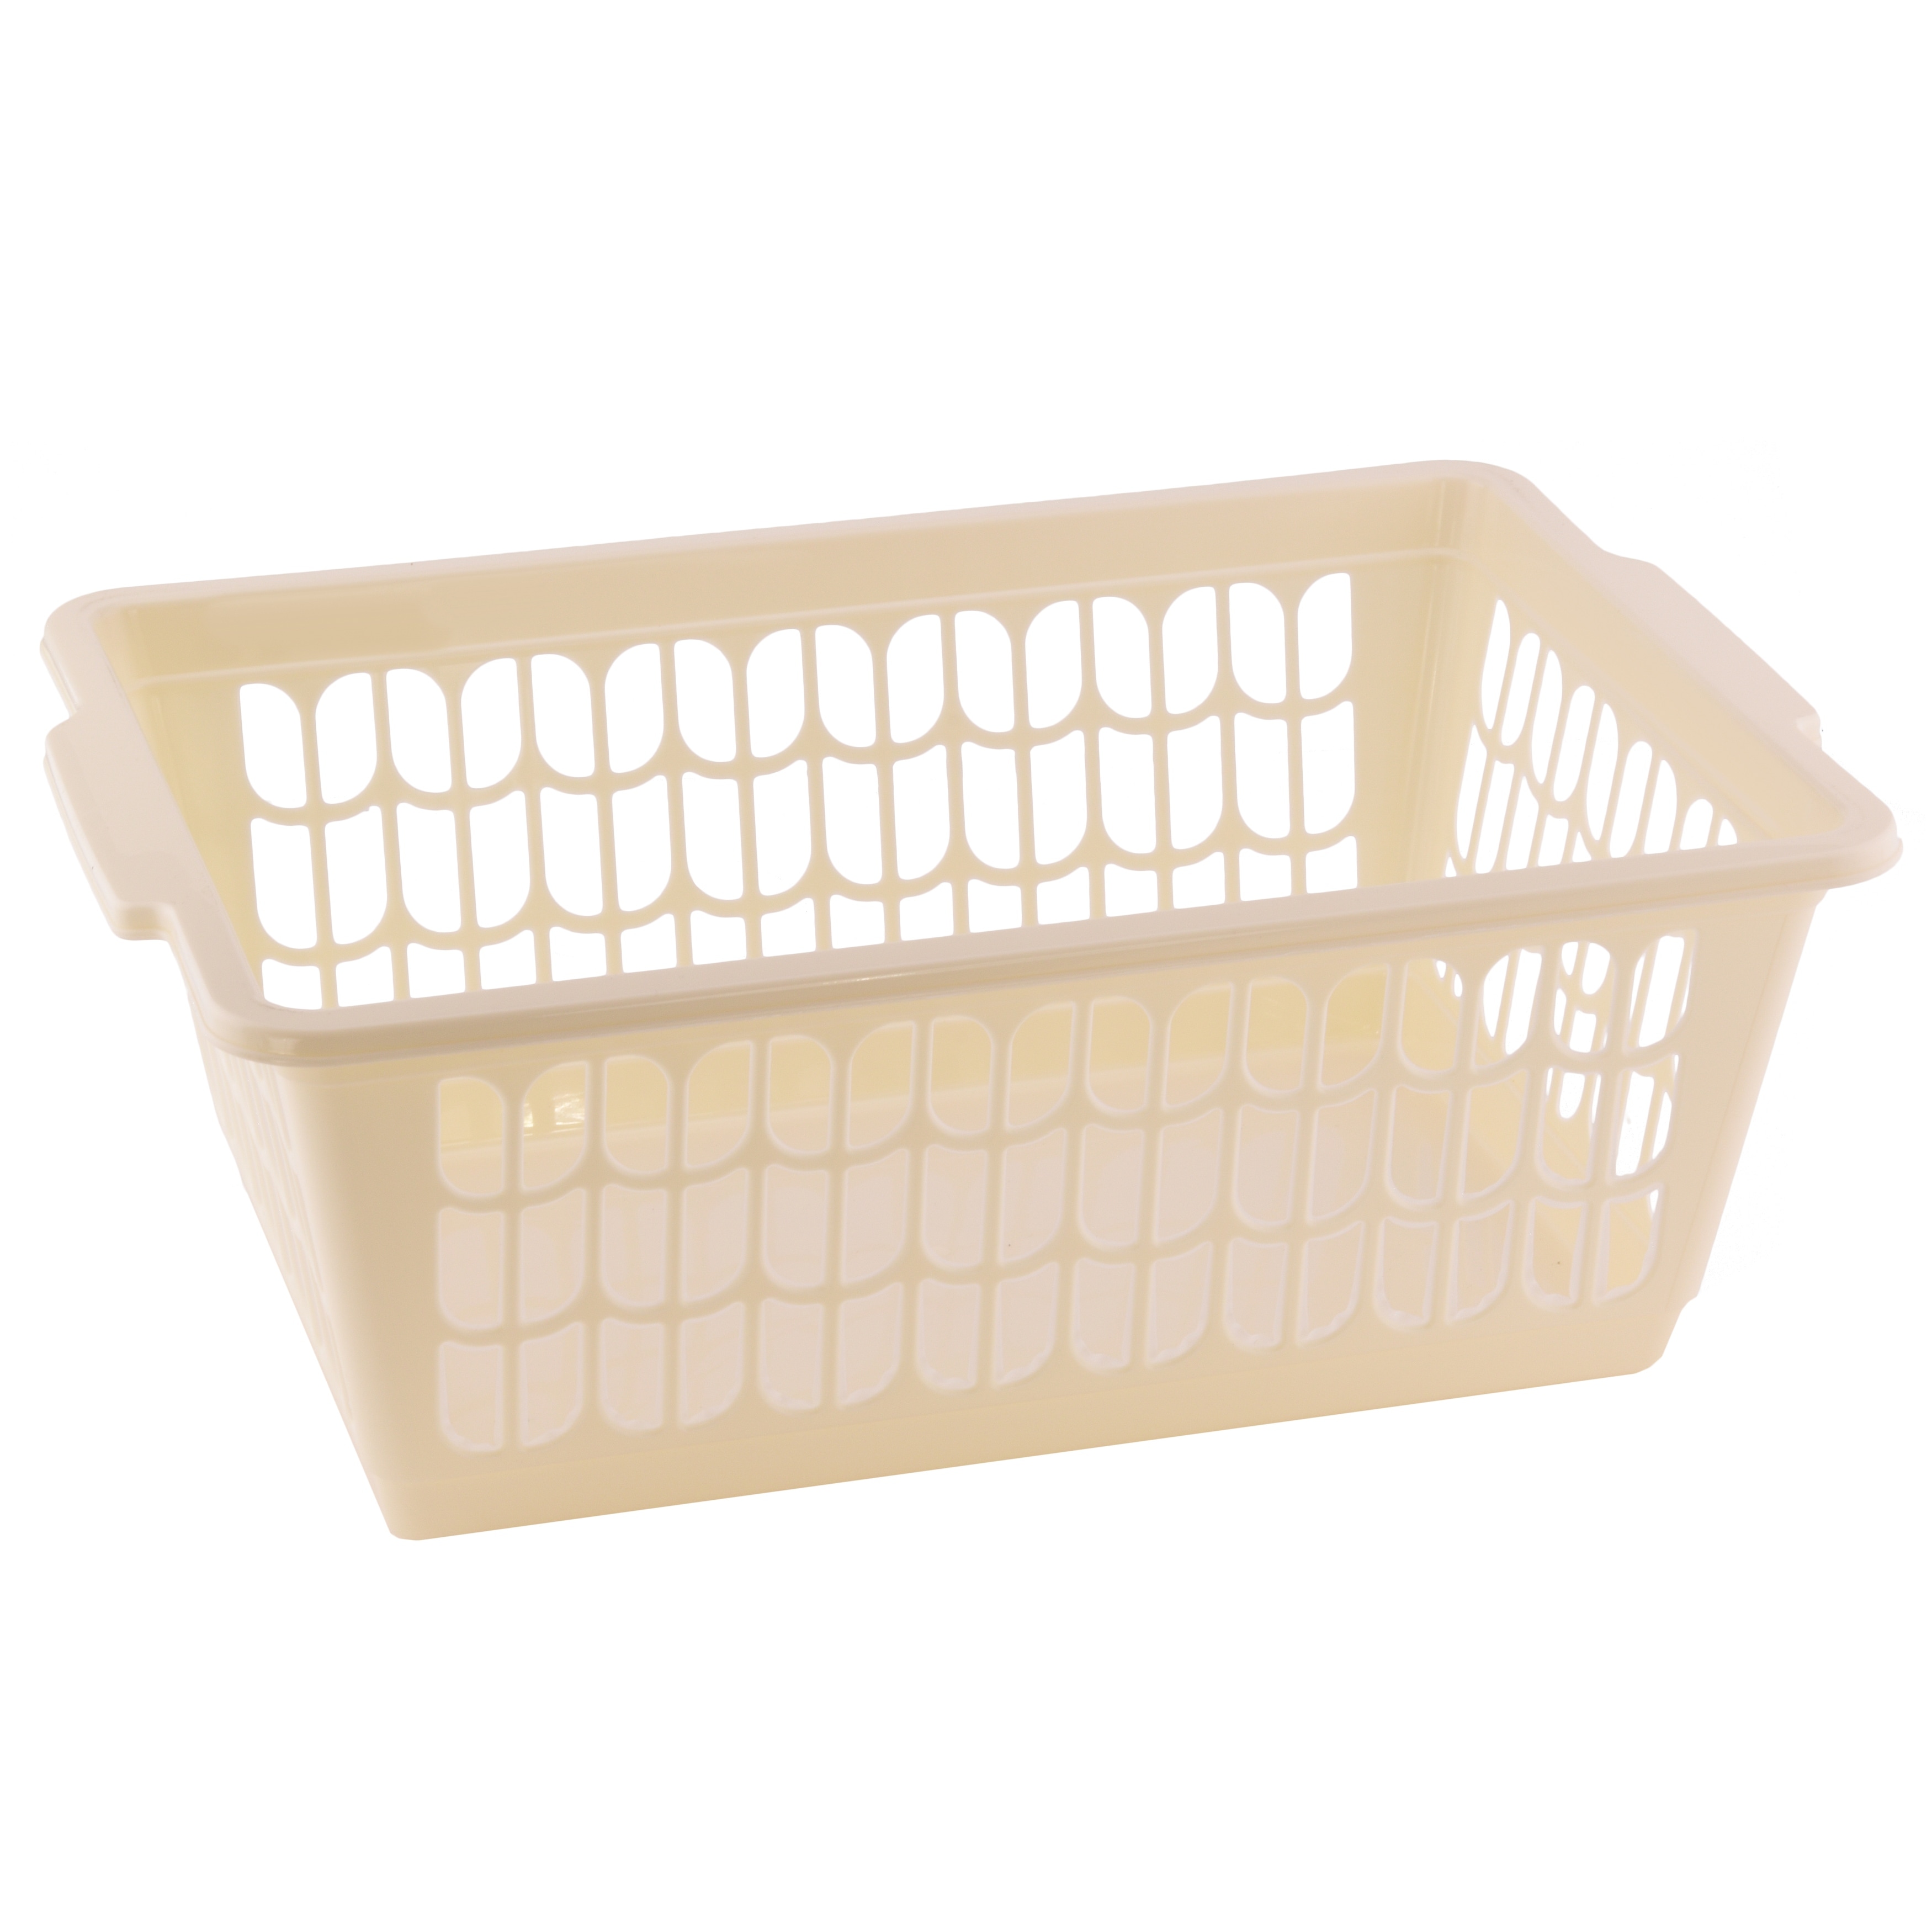 https://ak1.ostkcdn.com/images/products/is/images/direct/0b5f52e5cd8ac96622726caa899a1b5743c49c26/Small-Plastic-Storage-Basket-for-Organizing-Kitchen-Pantry%2C-Countertop%2C-Shelves.jpg